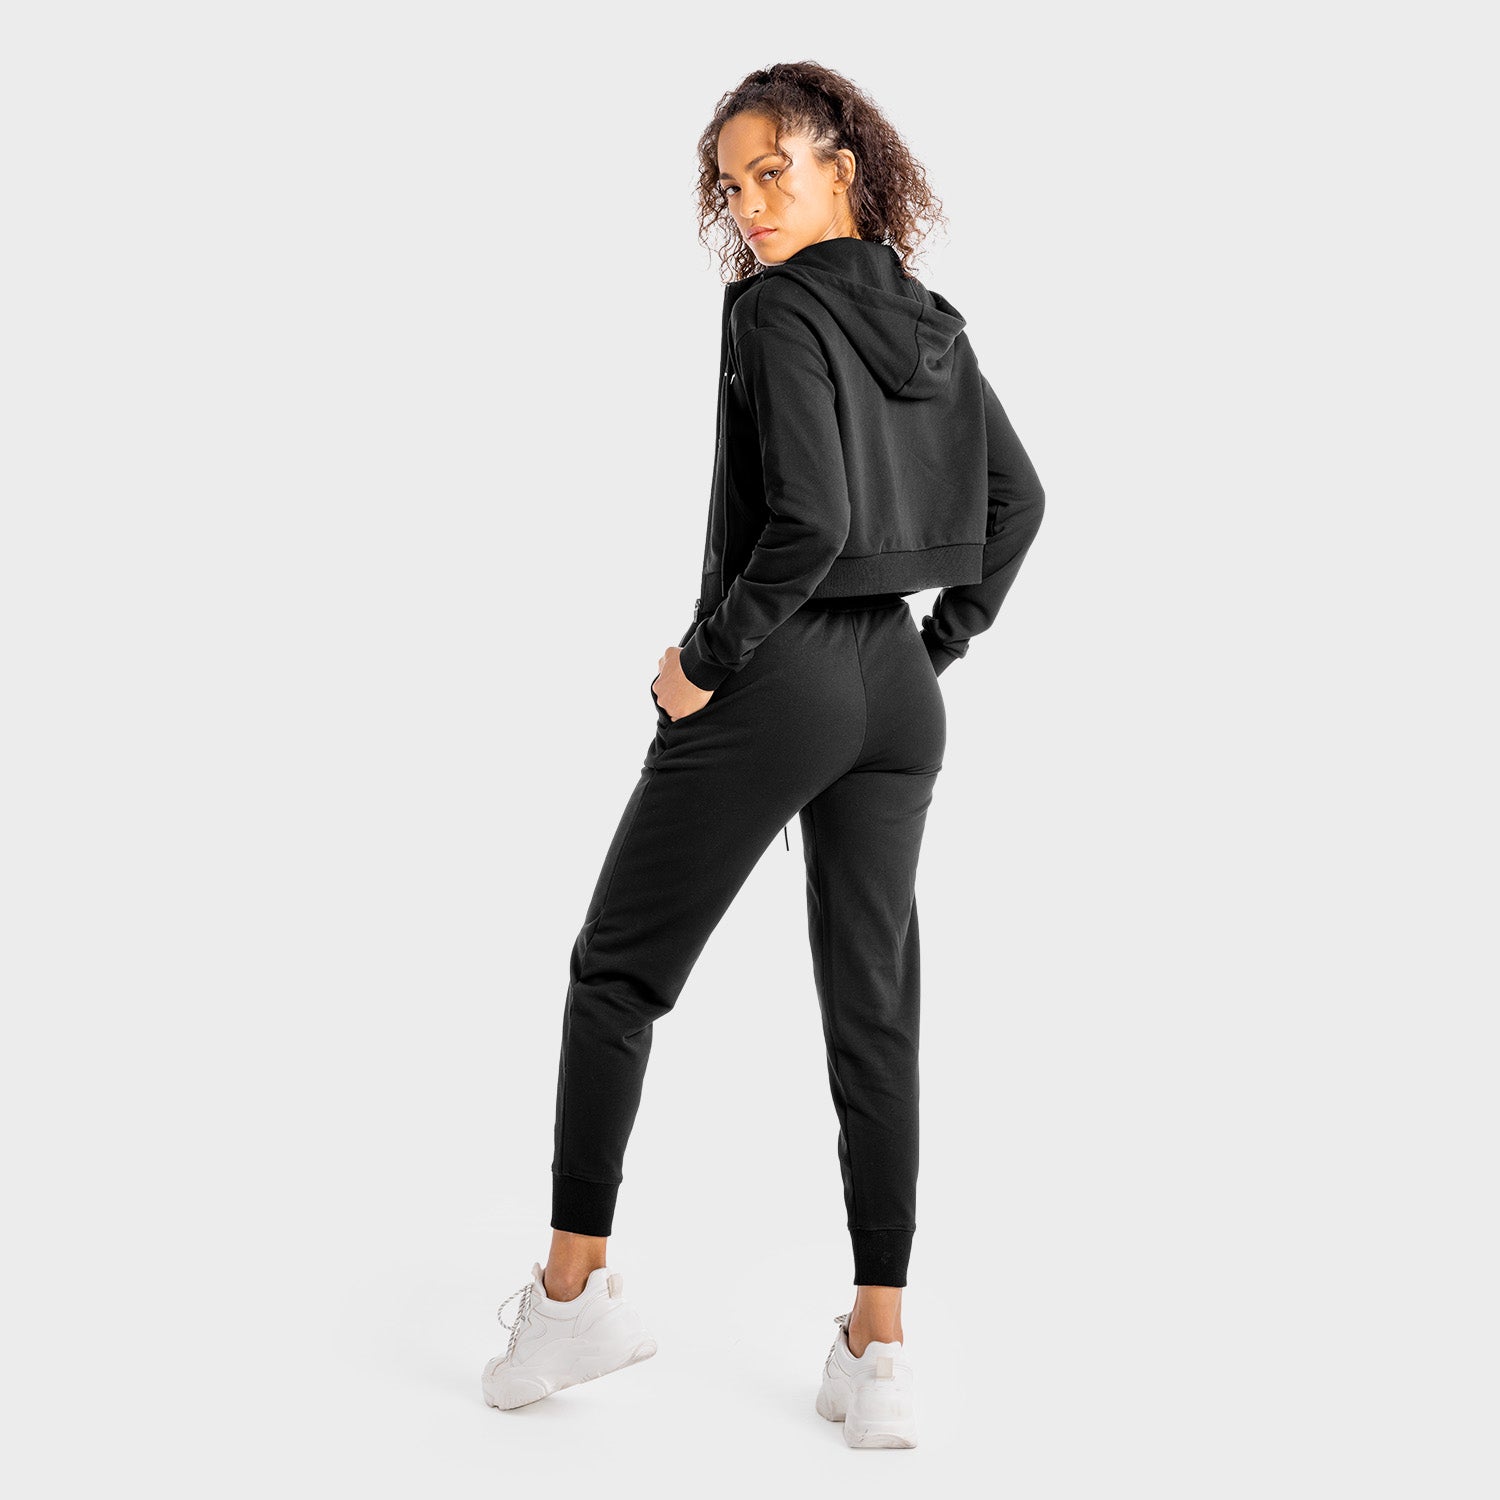 squatwolf-gym-hoodies-women-core-zip-up-onyx-workout-clothes